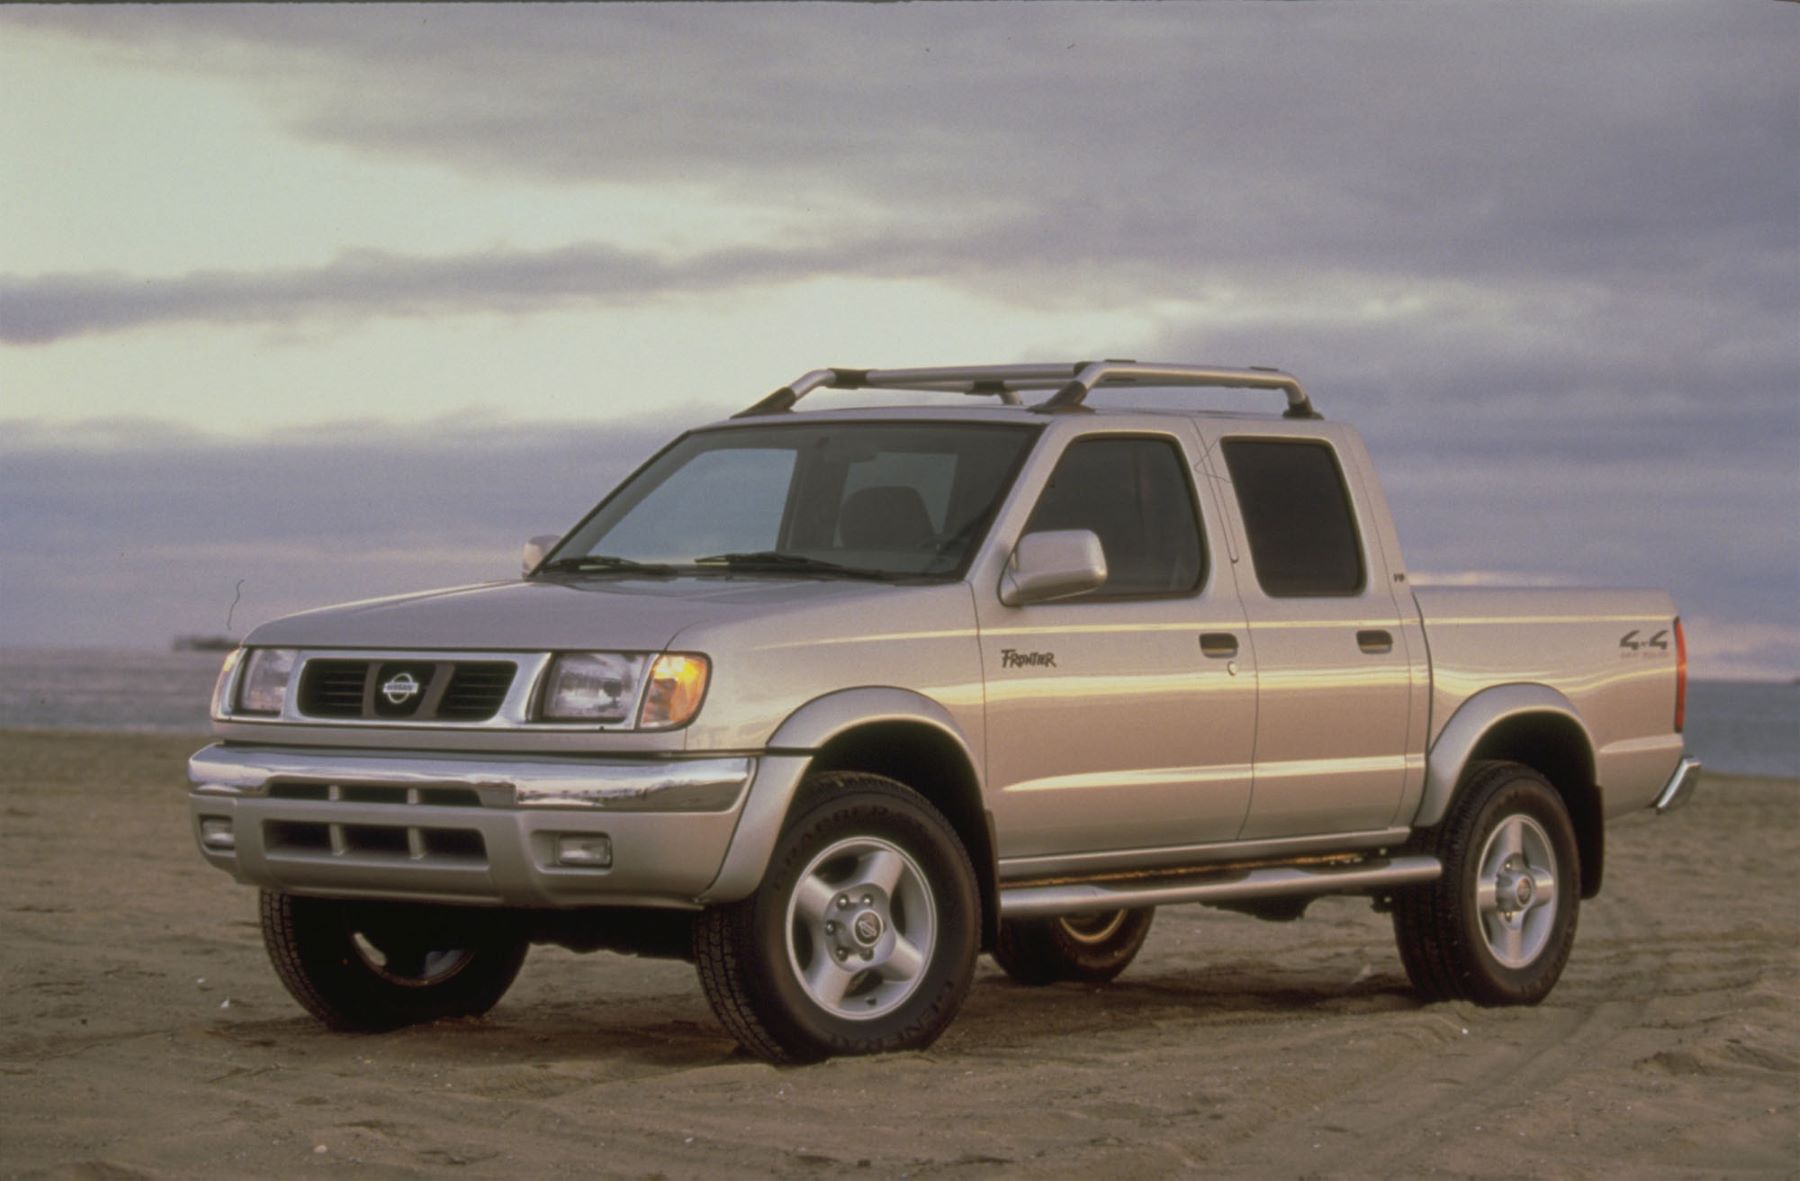 2000 Nissan Frontier crew cab four-door light pickup truck has some of the most common Nissan Frontier problems